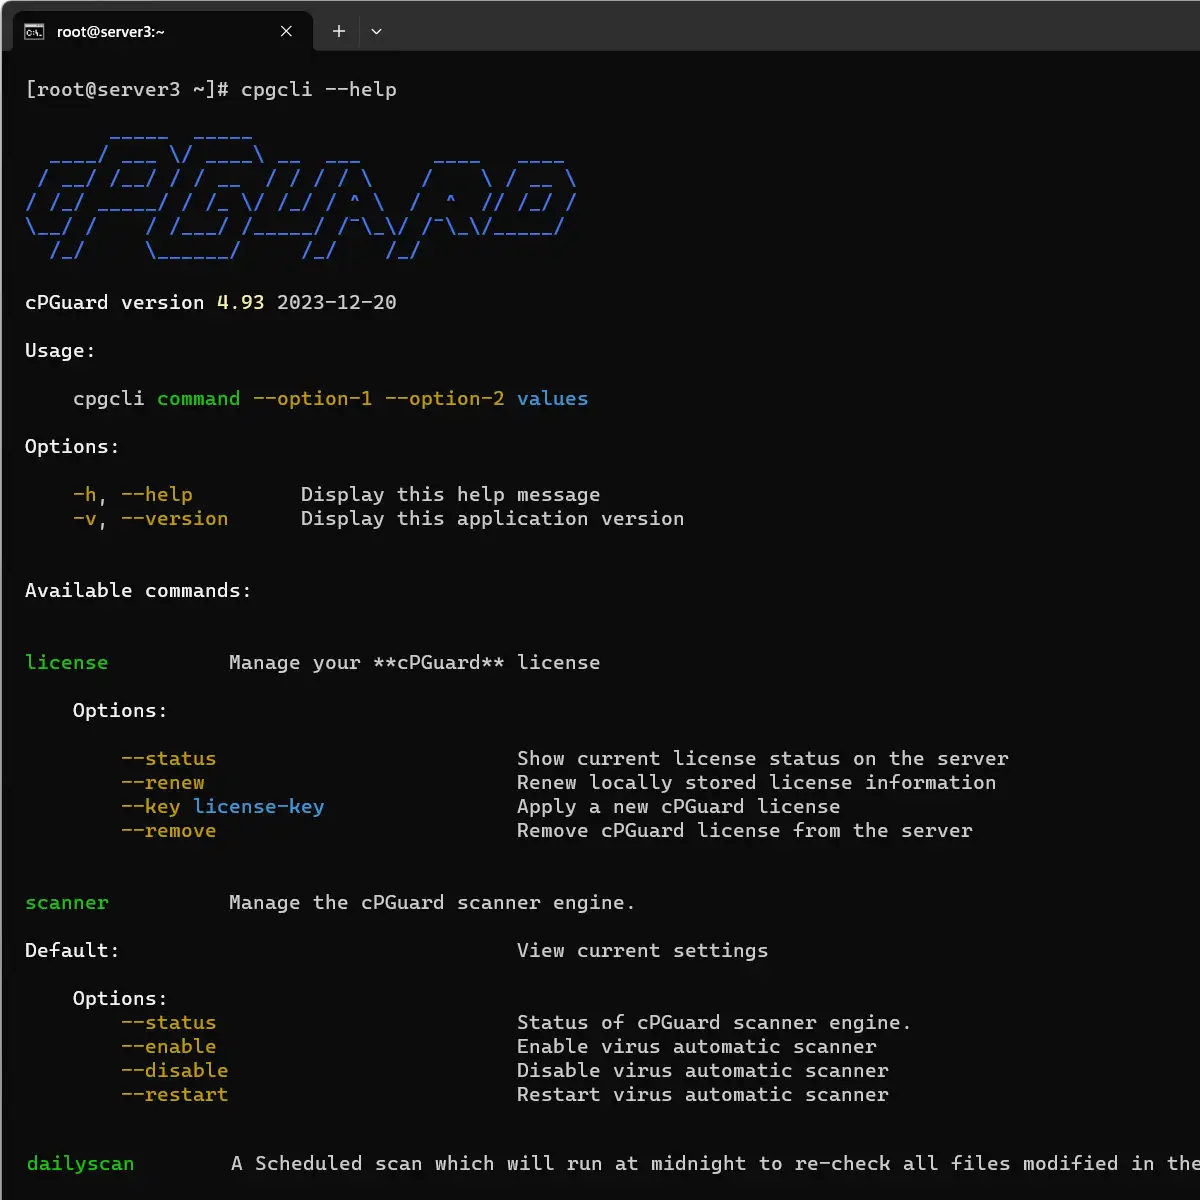 cPGuard command line interface